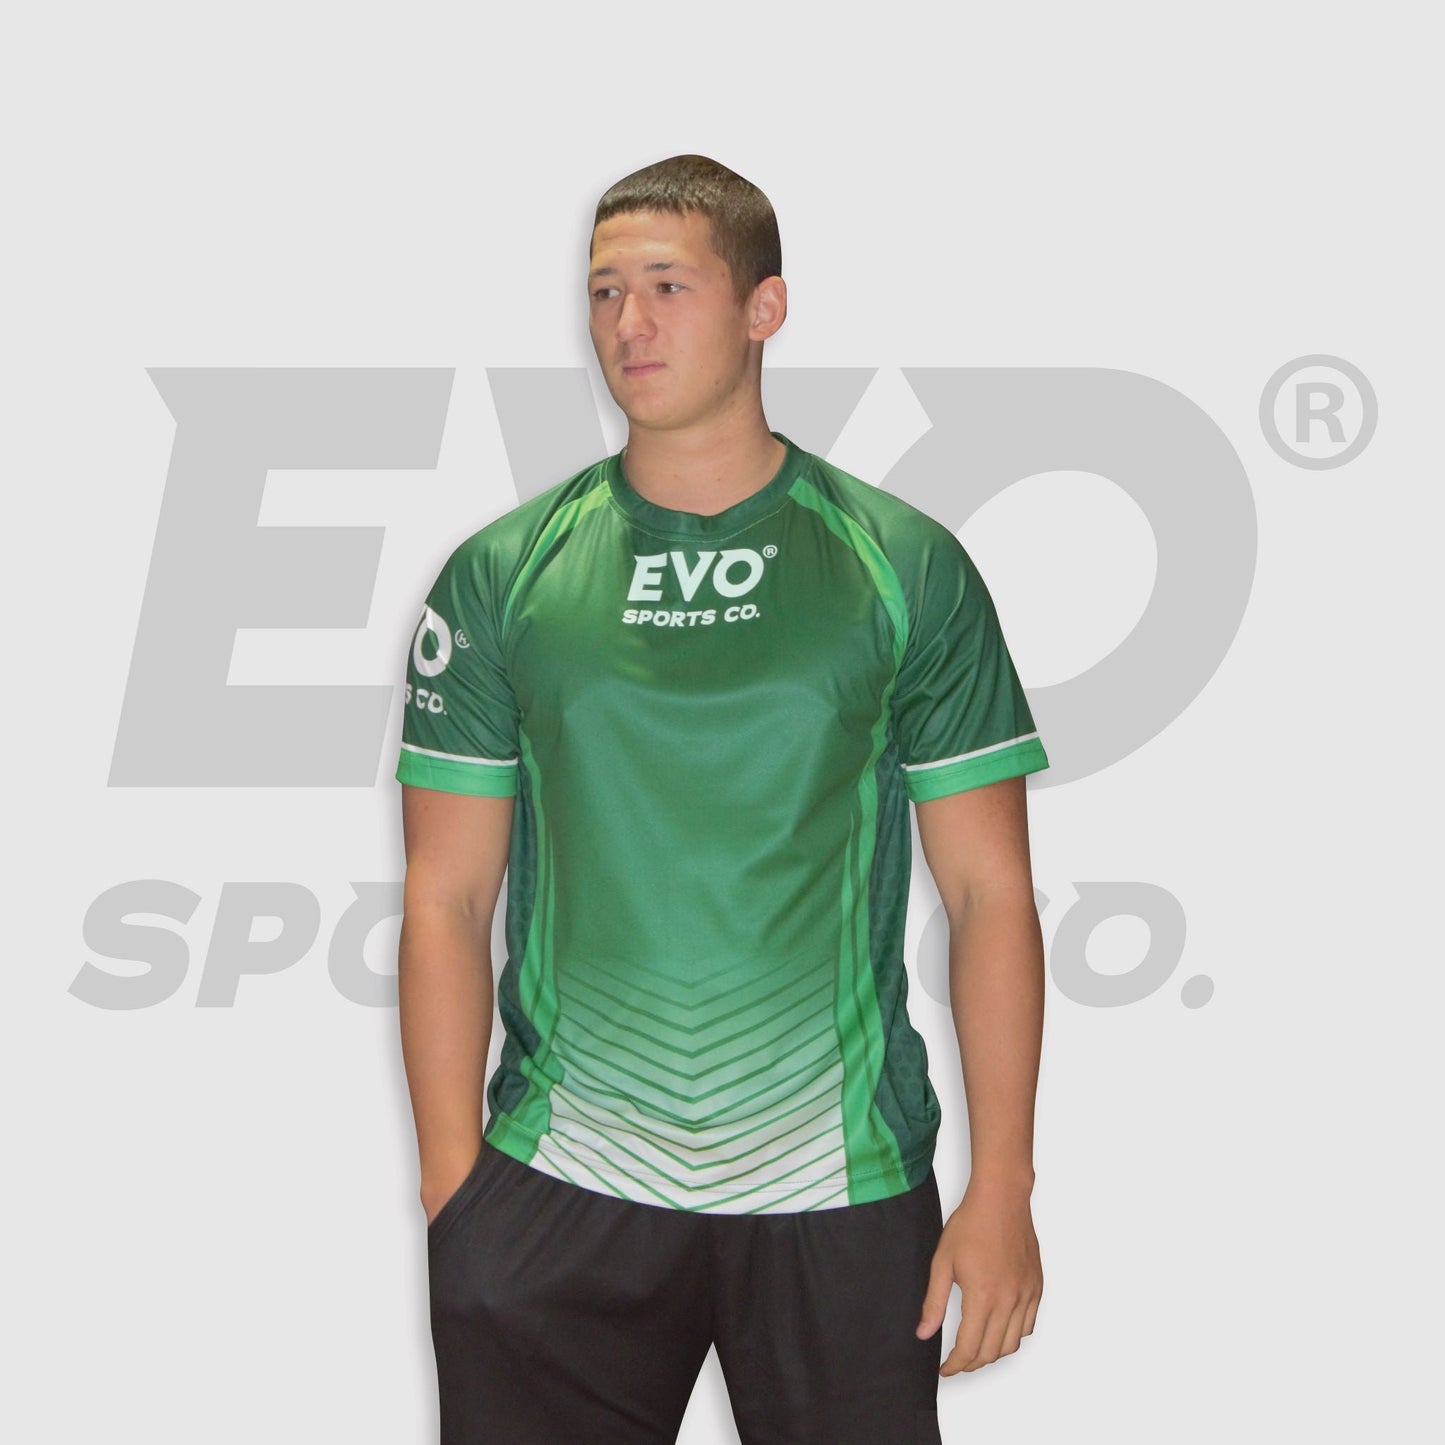 Unisex Adults FootyTag Quick Dry Shirt - Green - Evo Sports Co